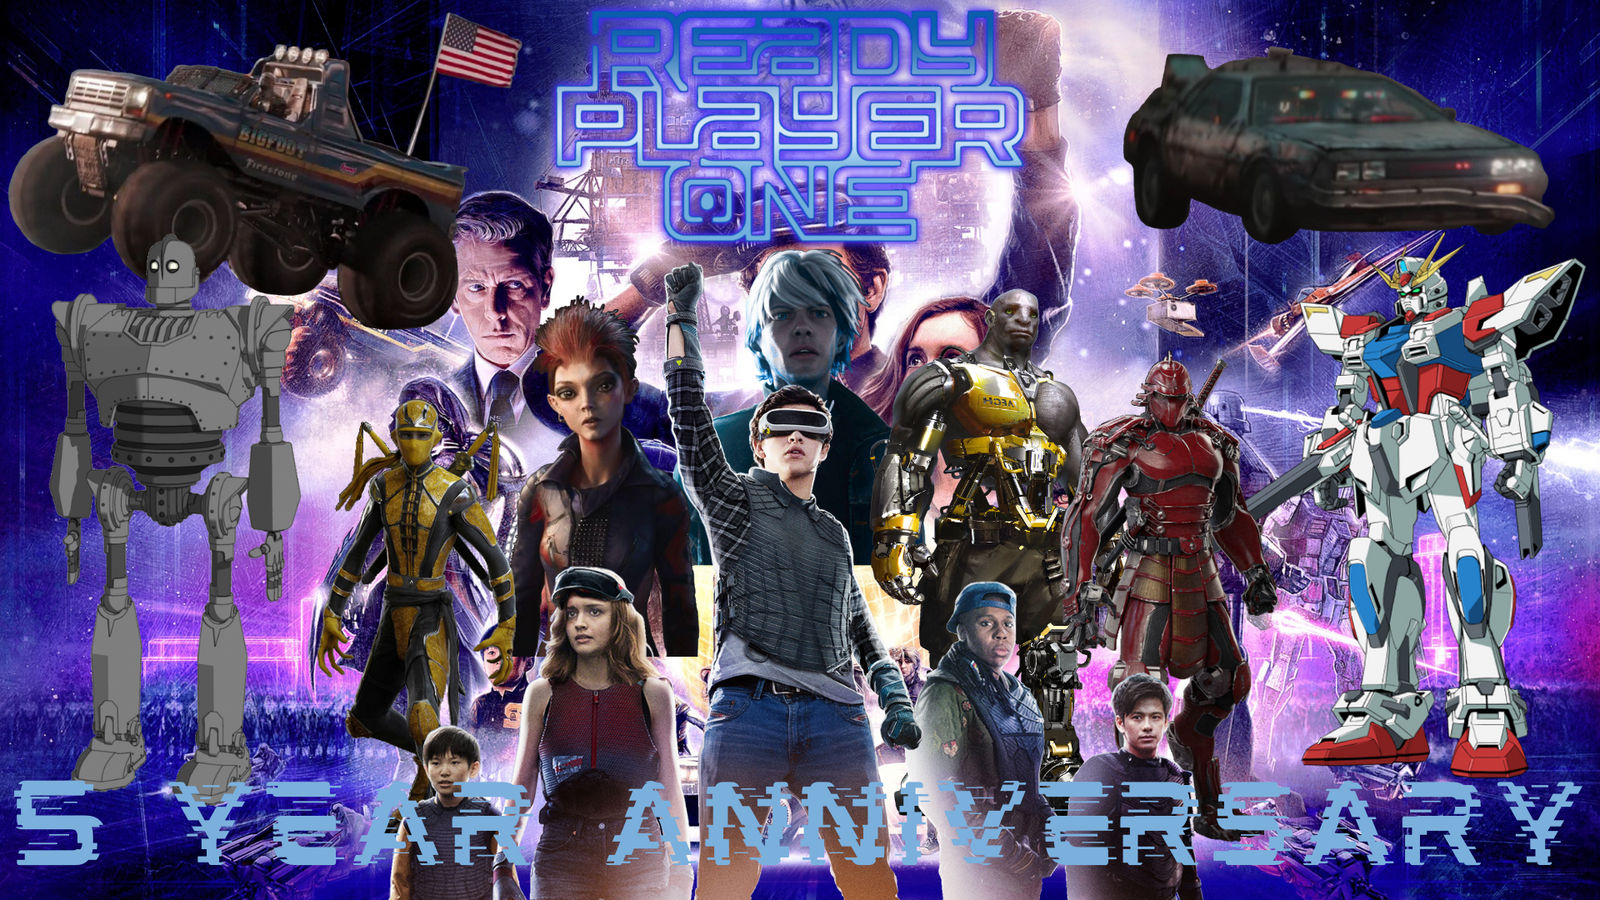 Ready Player One 5 Year Anniversary #4 by DipperBronyPines98 on DeviantArt